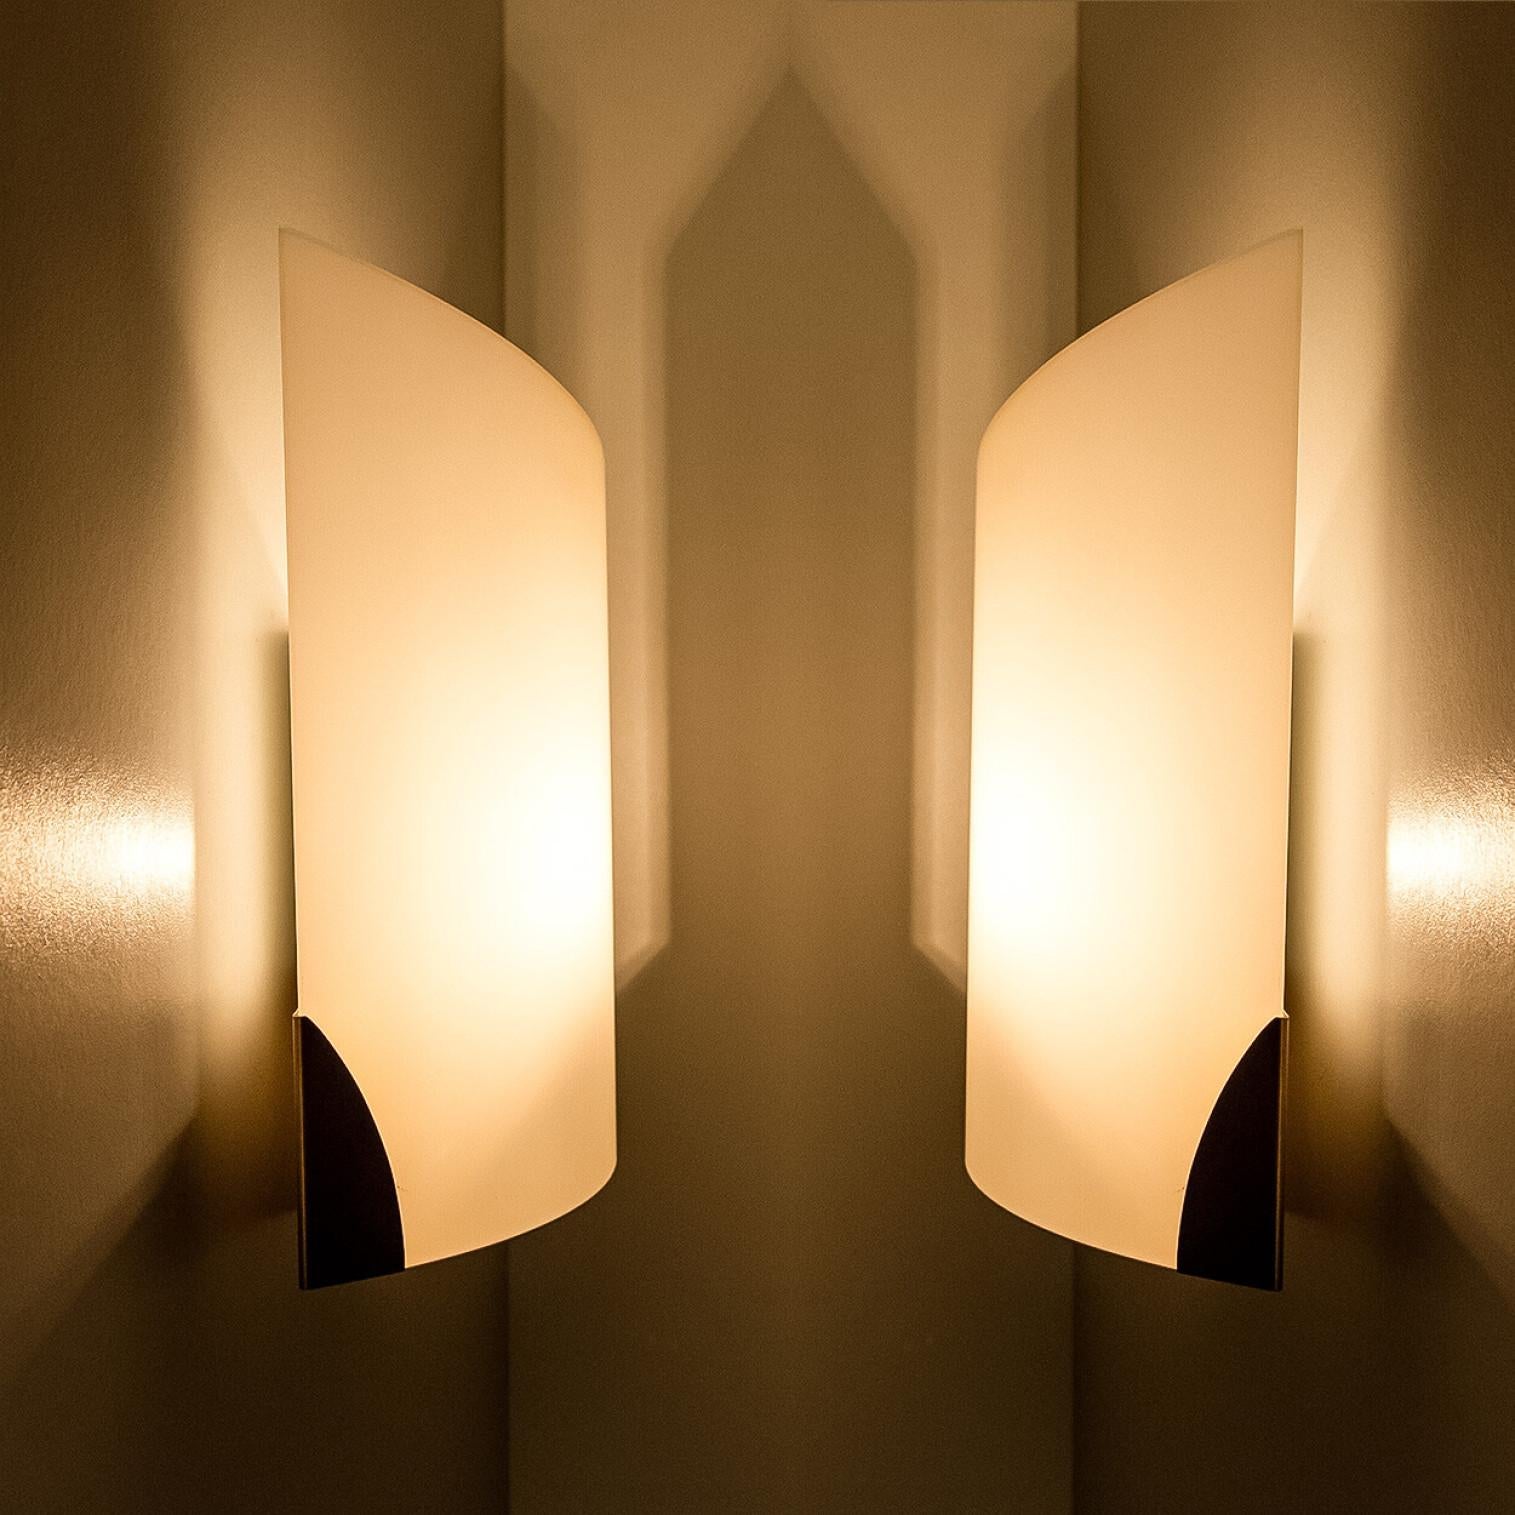 1 of 4 Cylinder Shaped White Opaque Glass Wall Lights by Glashütte Limburg For Sale 4